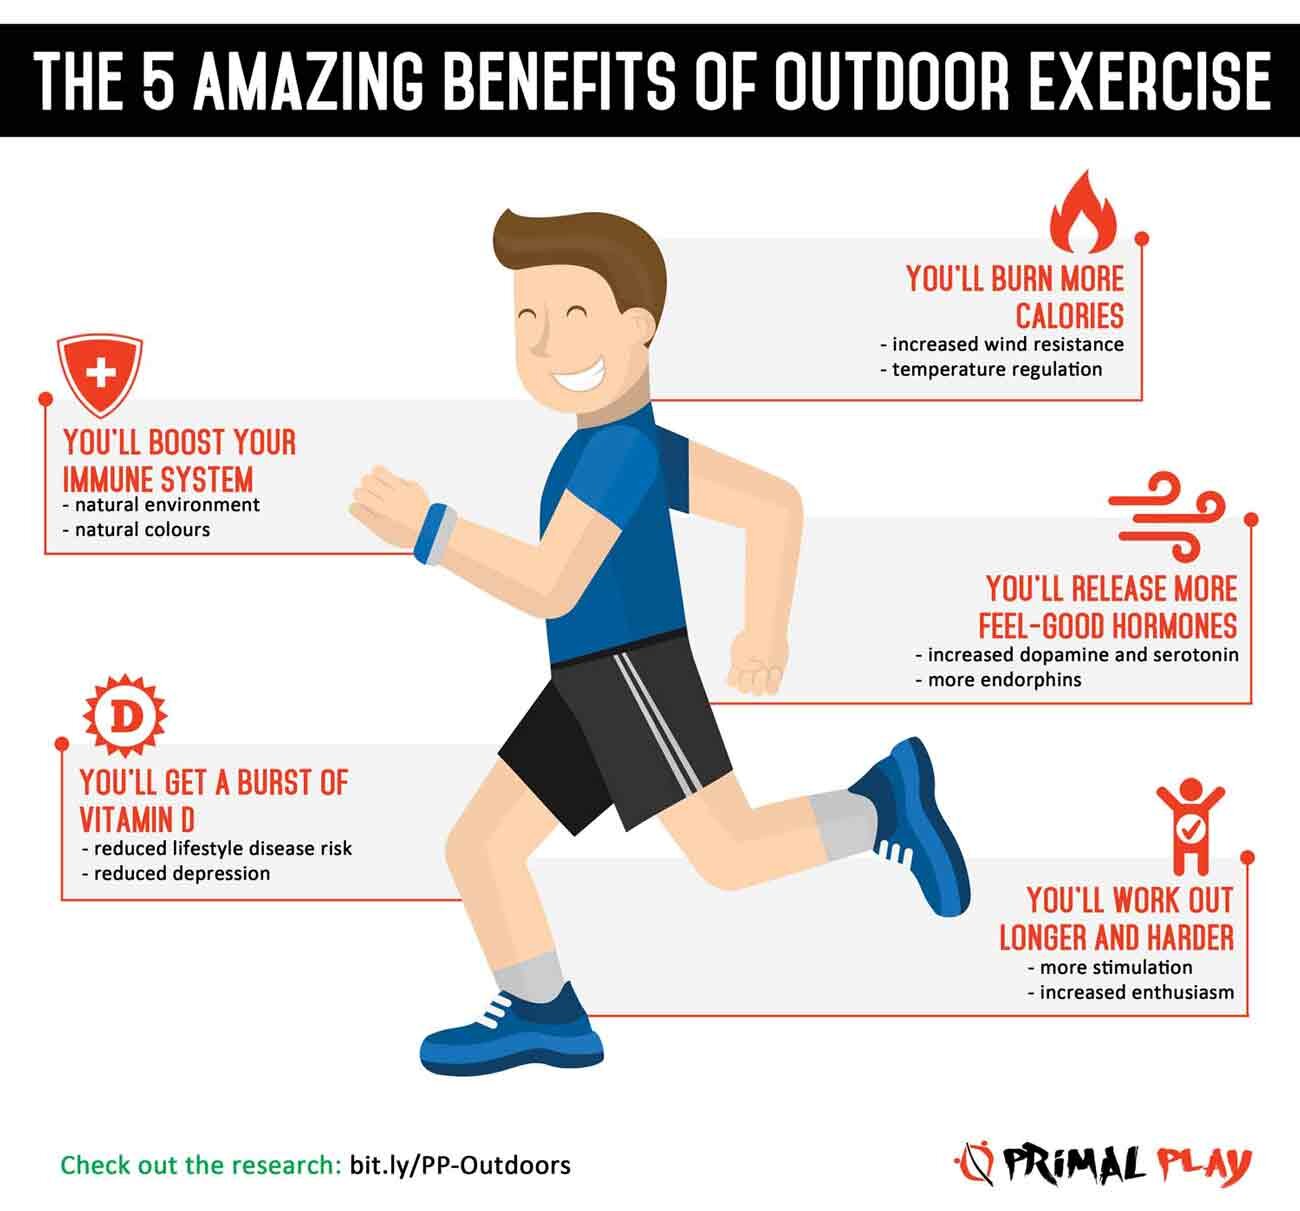 What are the advantages of outdoor exercise for health?